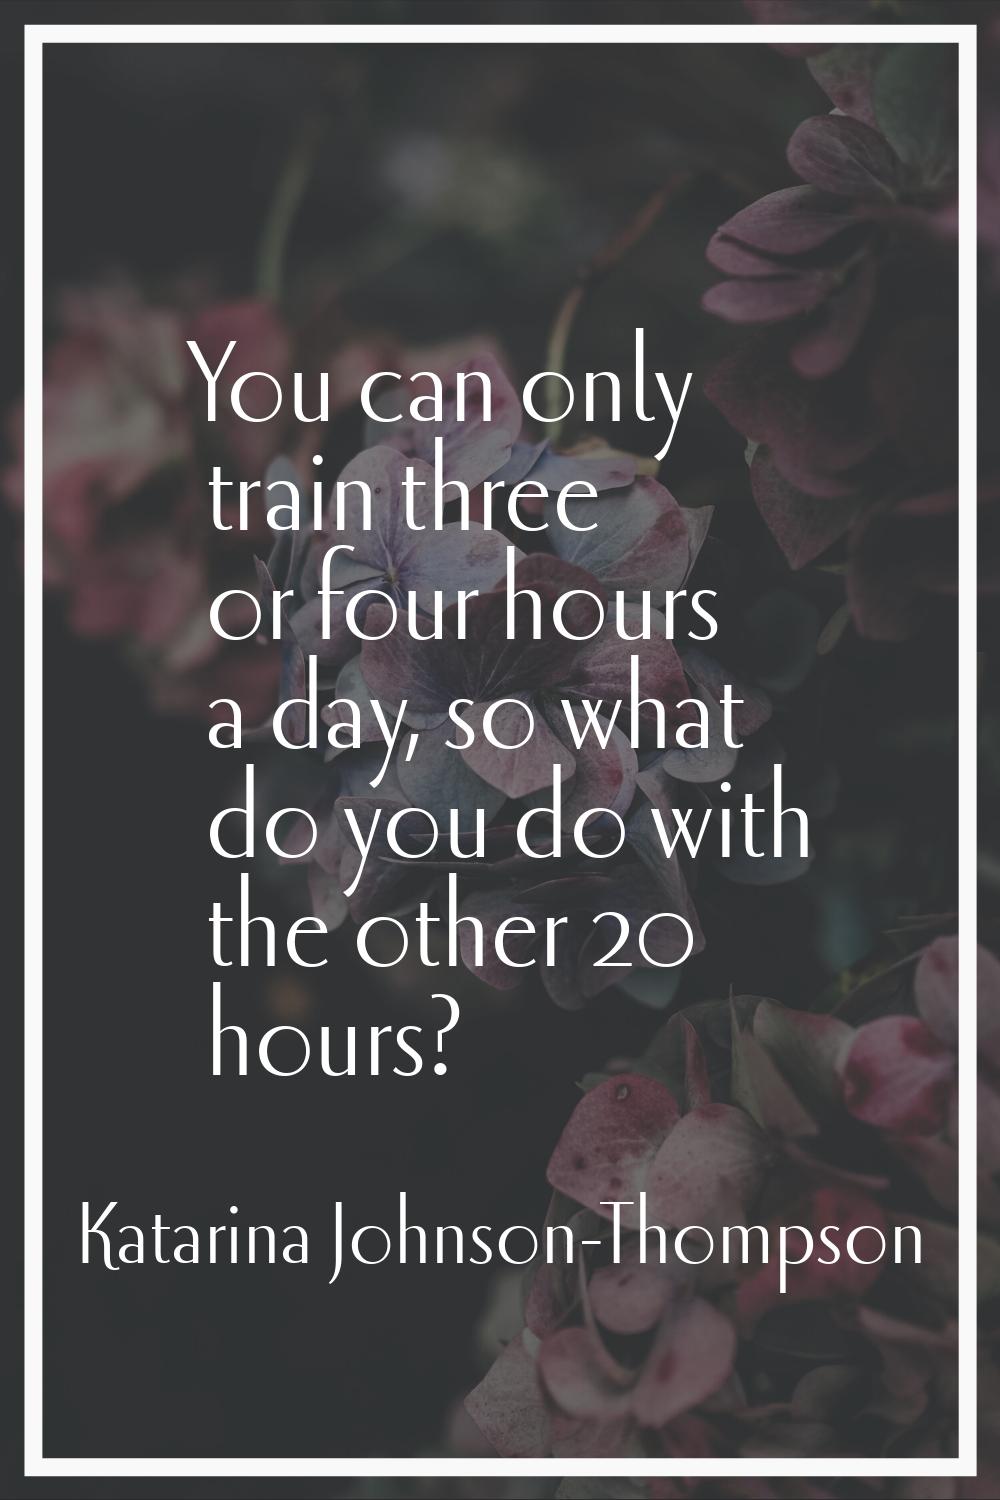 You can only train three or four hours a day, so what do you do with the other 20 hours?